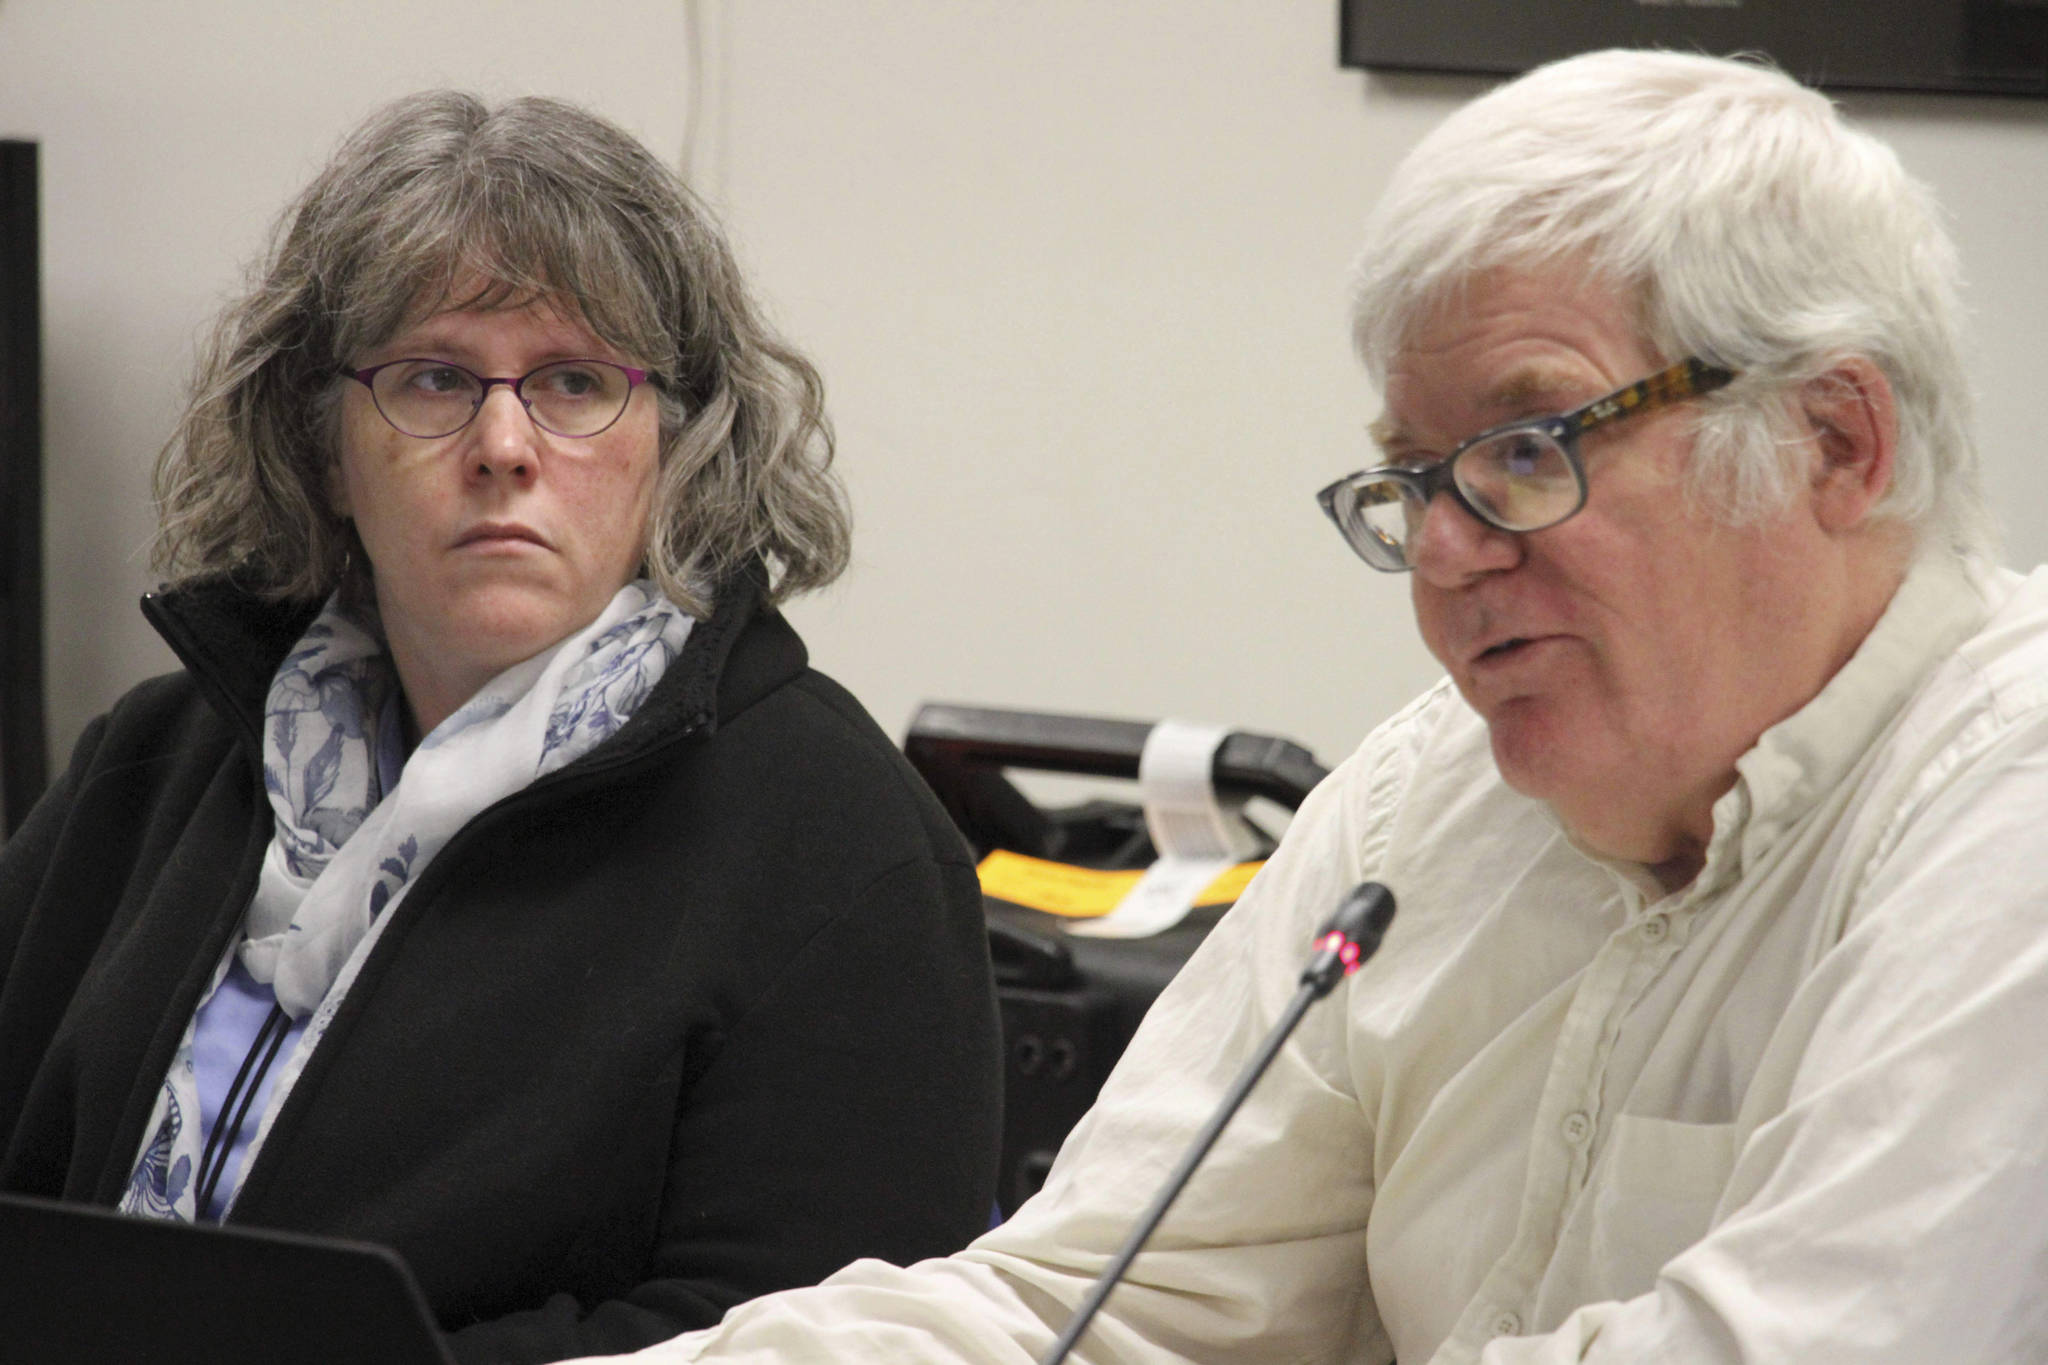 Former Director of the state’s combined alcohol and marijuana control office Erika McConnell, left, sits with Marijuana board chairman Mark Springer in Anchorage, Alaska, on Wednesday, Nov. 13, 2019. The board that regulates Alaska’s legal marijuana industry voted to fire McConnell following last month’s vote by the Alcoholic Beverage Control Board to dismiss her. (AP Photo/Mark Thiessen)